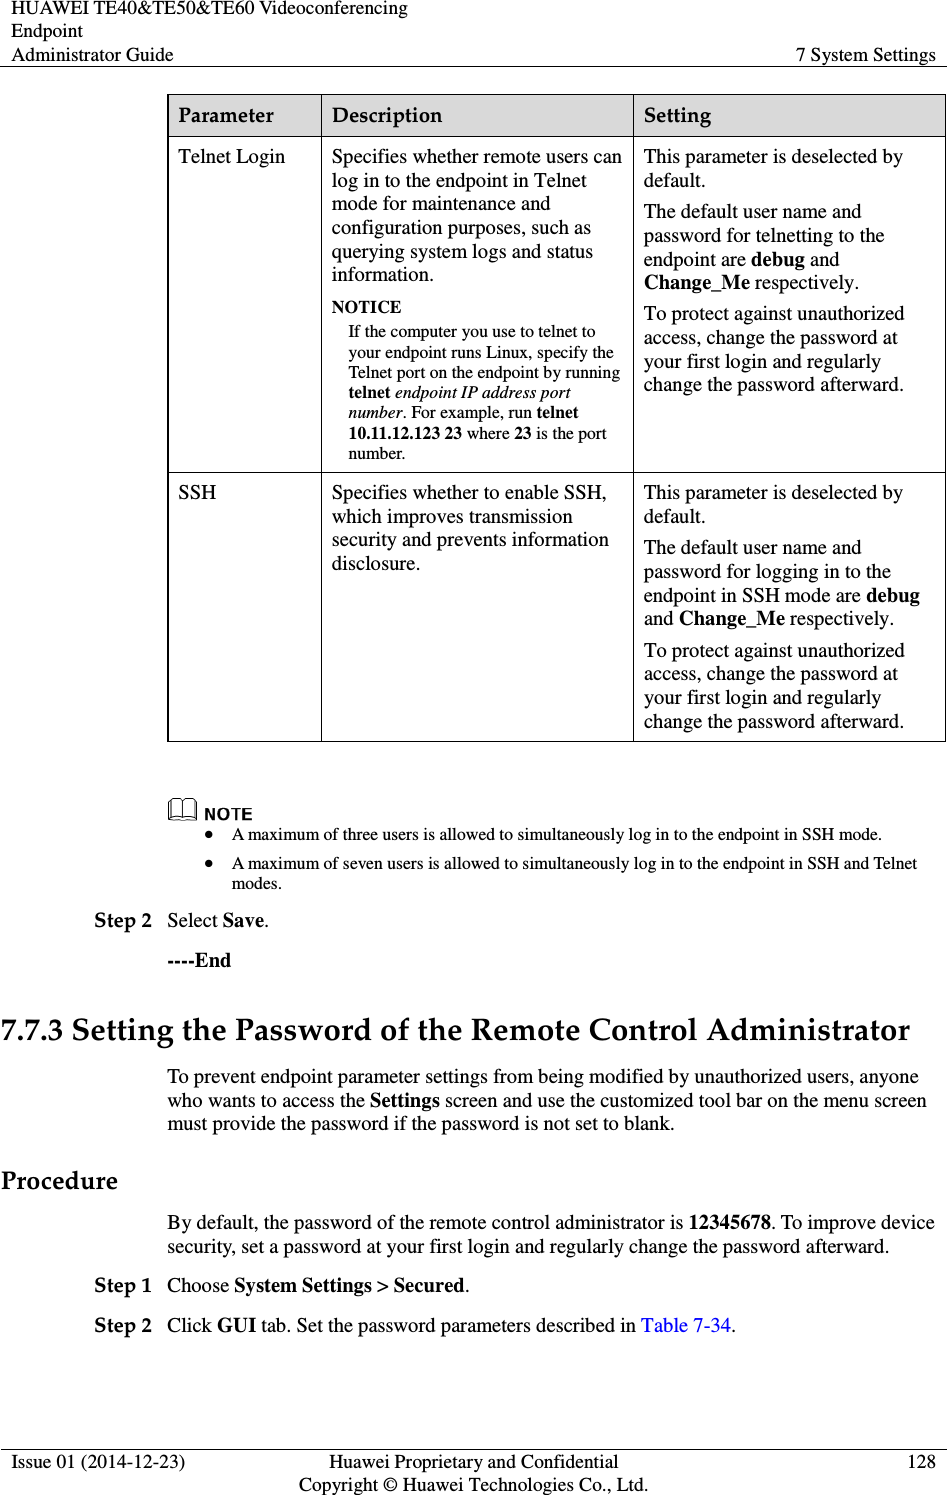 HUAWEI TE40&amp;TE50&amp;TE60 Videoconferencing Endpoint Administrator Guide  7 System Settings  Issue 01 (2014-12-23)  Huawei Proprietary and Confidential                                     Copyright © Huawei Technologies Co., Ltd. 128  Parameter  Description  Setting Telnet Login  Specifies whether remote users can log in to the endpoint in Telnet mode for maintenance and configuration purposes, such as querying system logs and status information. NOTICE If the computer you use to telnet to your endpoint runs Linux, specify the Telnet port on the endpoint by running telnet endpoint IP address port number. For example, run telnet 10.11.12.123 23 where 23 is the port number. This parameter is deselected by default. The default user name and password for telnetting to the endpoint are debug and Change_Me respectively. To protect against unauthorized access, change the password at your first login and regularly change the password afterward.   SSH  Specifies whether to enable SSH, which improves transmission security and prevents information disclosure.   This parameter is deselected by default. The default user name and password for logging in to the endpoint in SSH mode are debug and Change_Me respectively. To protect against unauthorized access, change the password at your first login and regularly change the password afterward.      A maximum of three users is allowed to simultaneously log in to the endpoint in SSH mode.    A maximum of seven users is allowed to simultaneously log in to the endpoint in SSH and Telnet modes.   Step 2 Select Save. ----End 7.7.3 Setting the Password of the Remote Control Administrator To prevent endpoint parameter settings from being modified by unauthorized users, anyone who wants to access the Settings screen and use the customized tool bar on the menu screen must provide the password if the password is not set to blank. Procedure By default, the password of the remote control administrator is 12345678. To improve device security, set a password at your first login and regularly change the password afterward. Step 1 Choose System Settings &gt; Secured. Step 2 Click GUI tab. Set the password parameters described in Table 7-34. 